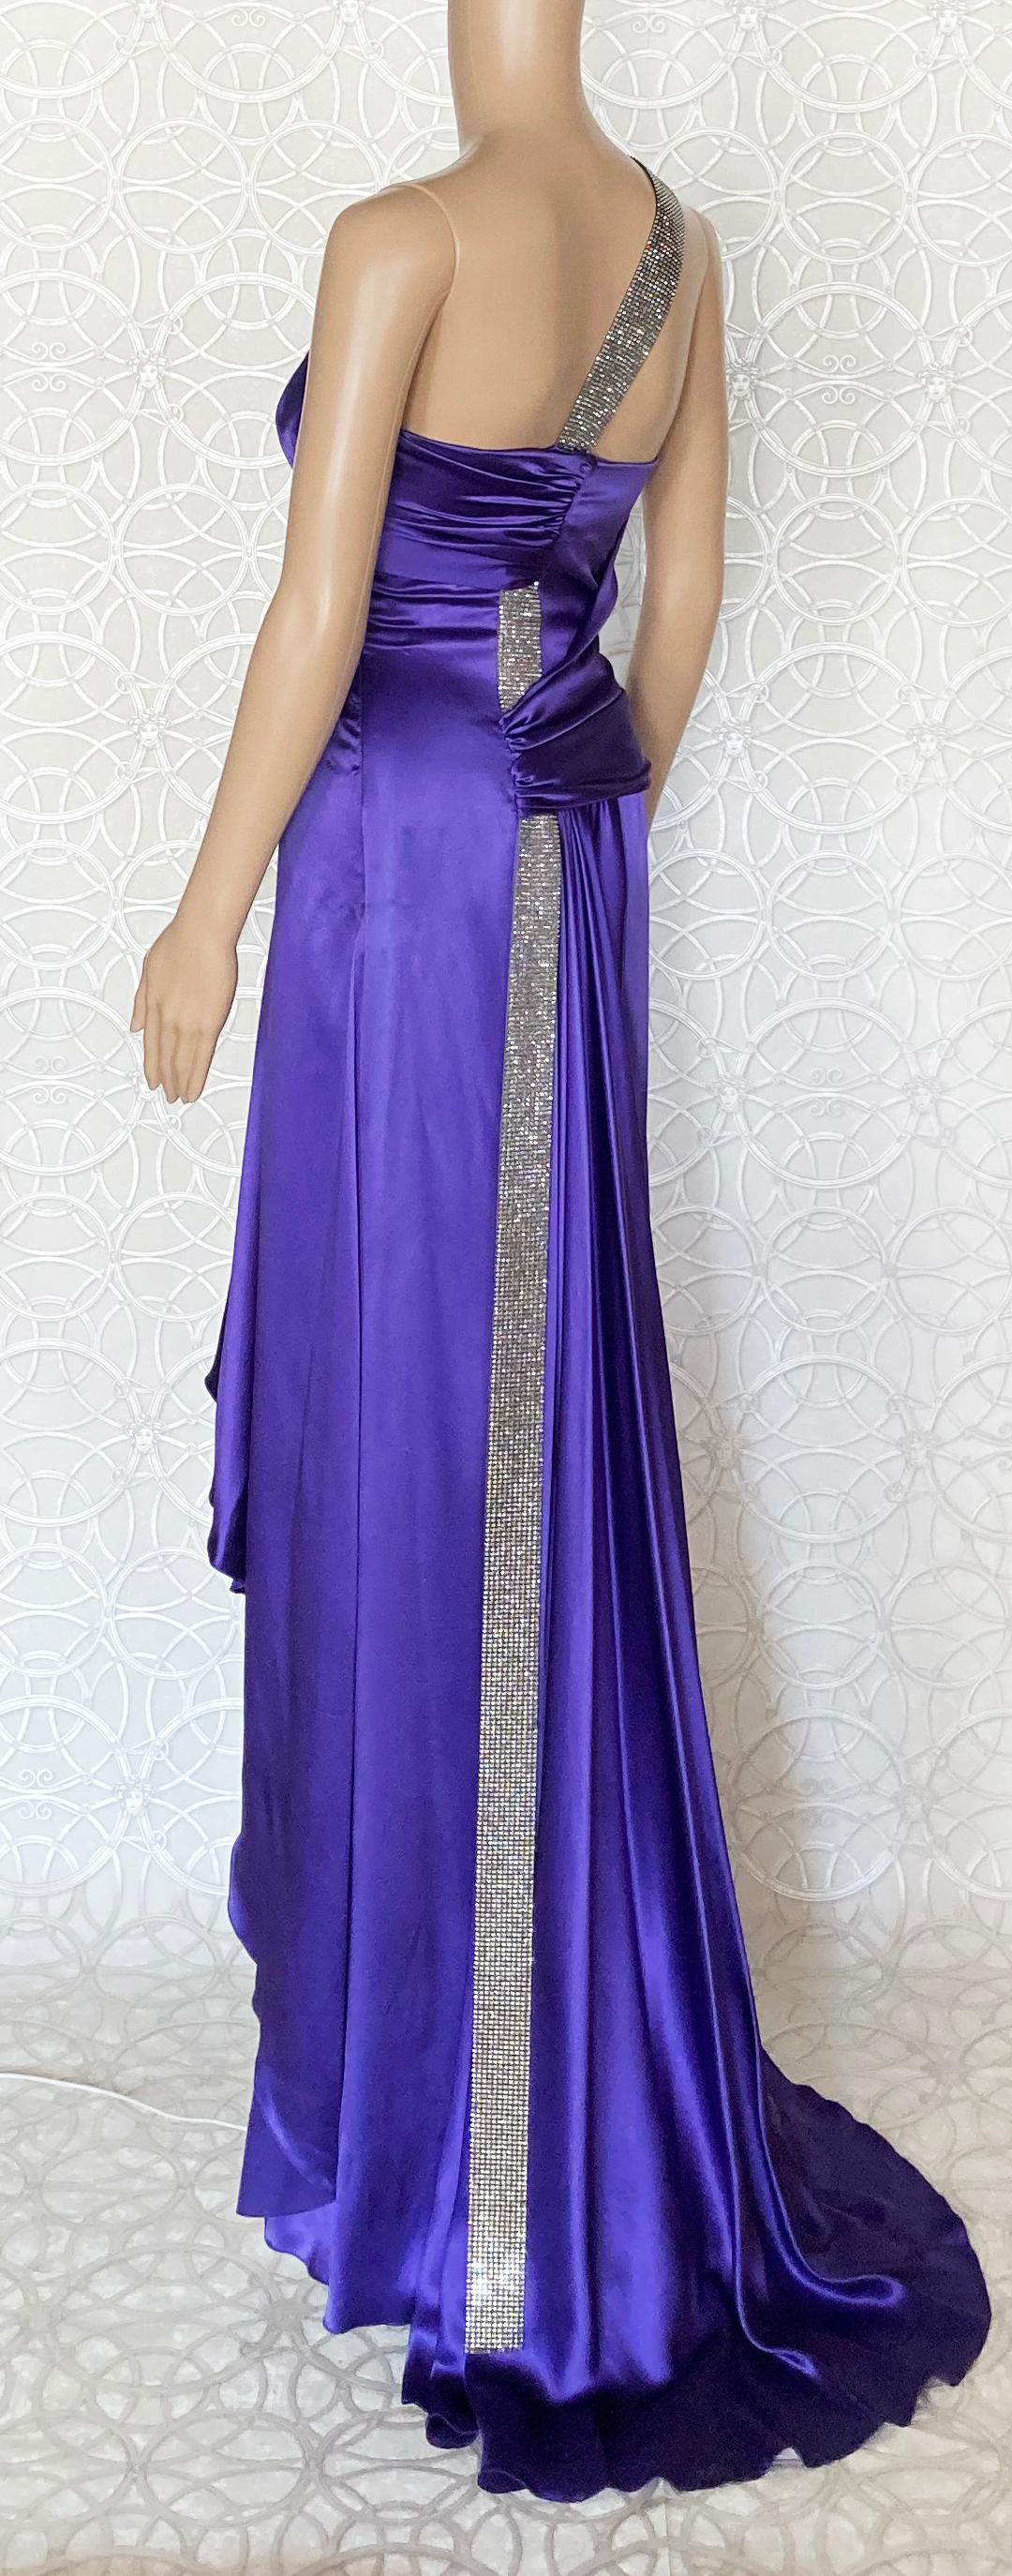 $8, 935 NEW VERSACE PURPLE CRYSTAL EMBELLISHED LONG 100% SILK DRESS Gown 38 - 2 For Sale 2